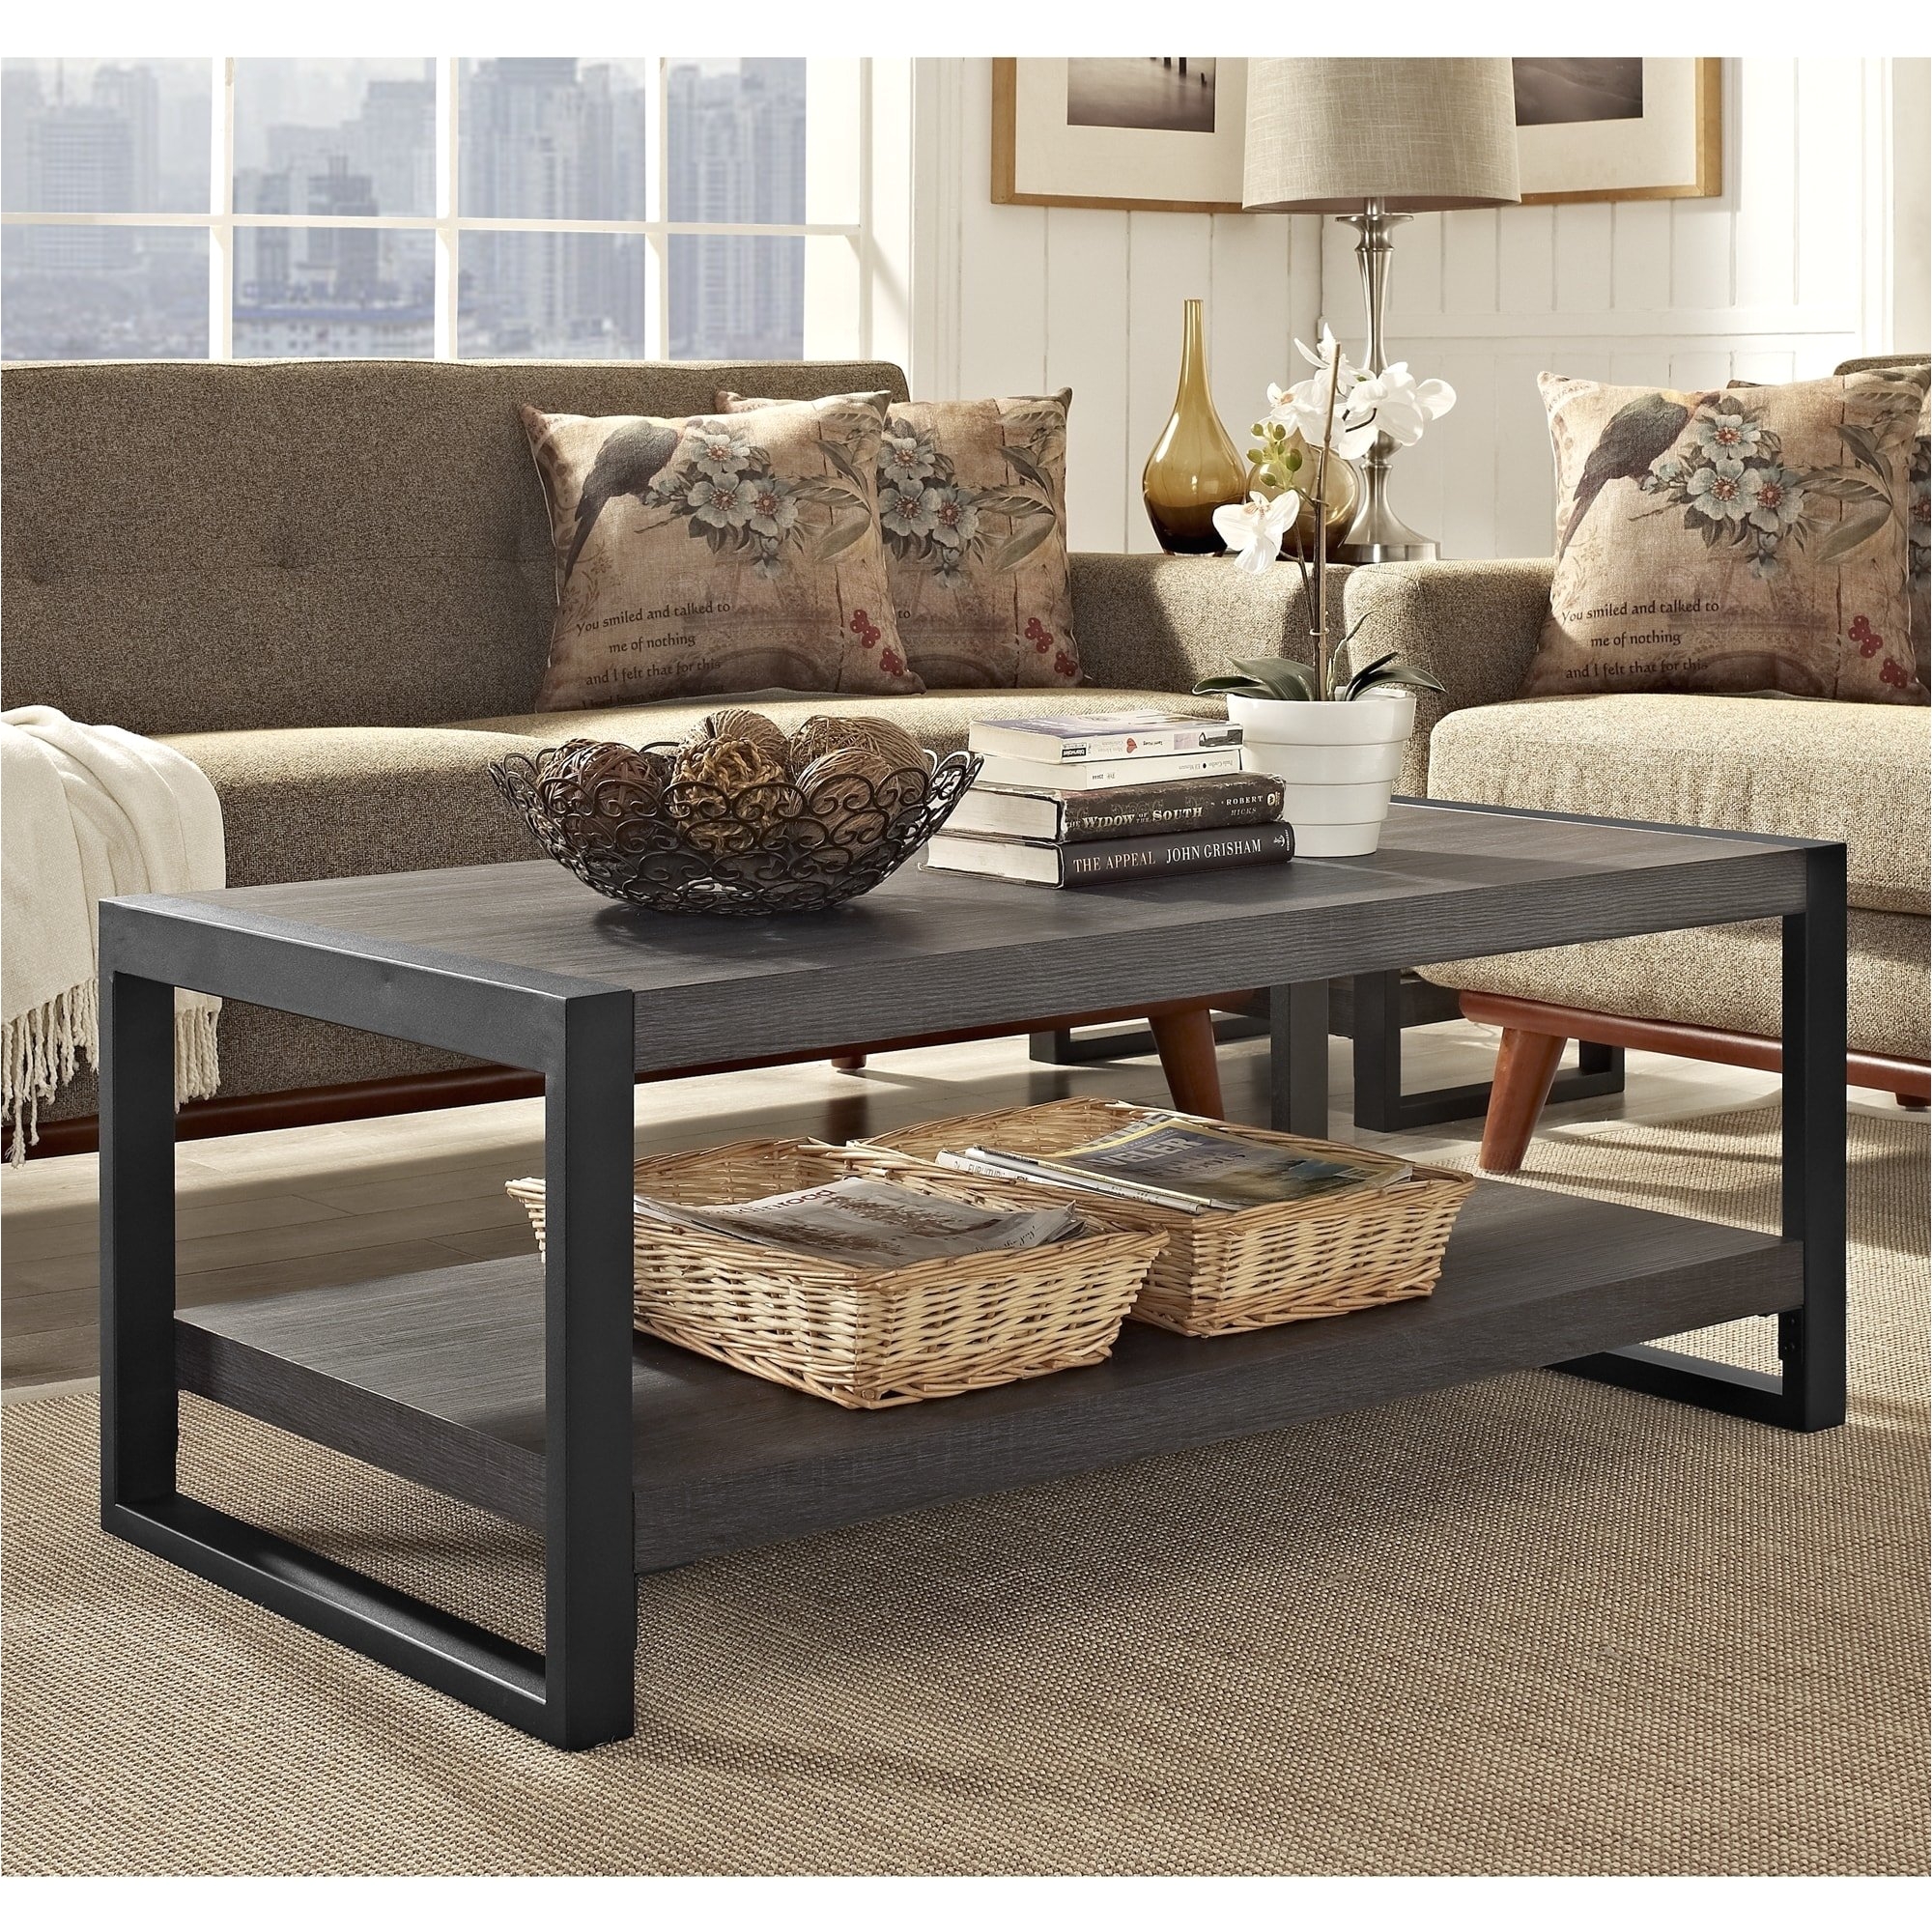 Shop angelo HOME 48" Coffee Table 48 x 24 x 18h Sale Free Shipping Today Overstock